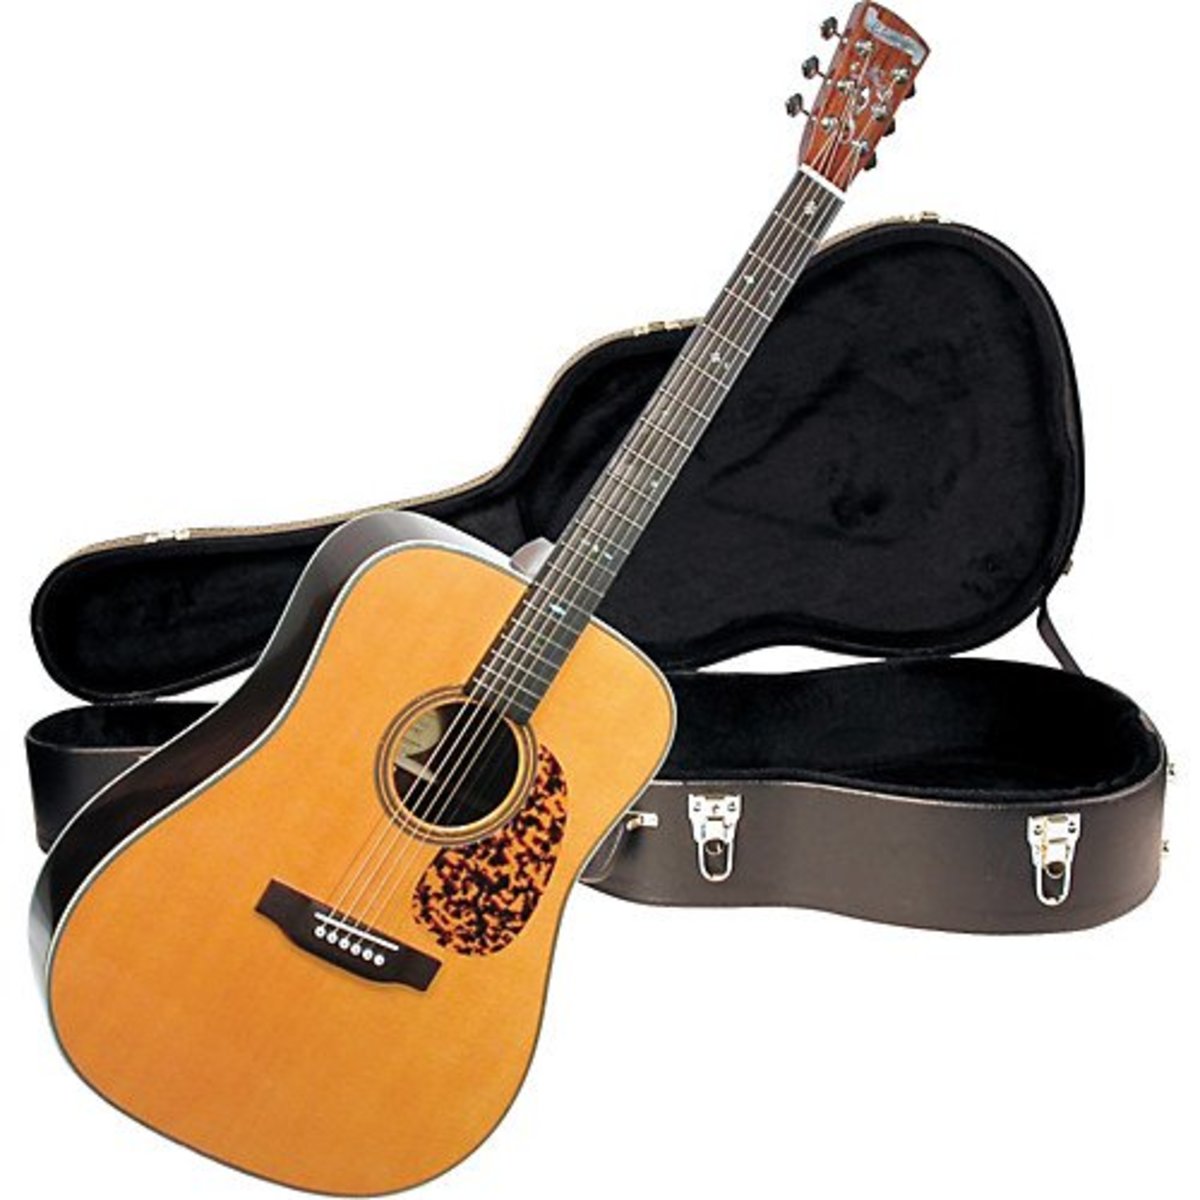 the-finest-brazilian-rosewood-body-dreadnought-acoustic-steel-string-guitars-for-serious-amateurs-and-professionals